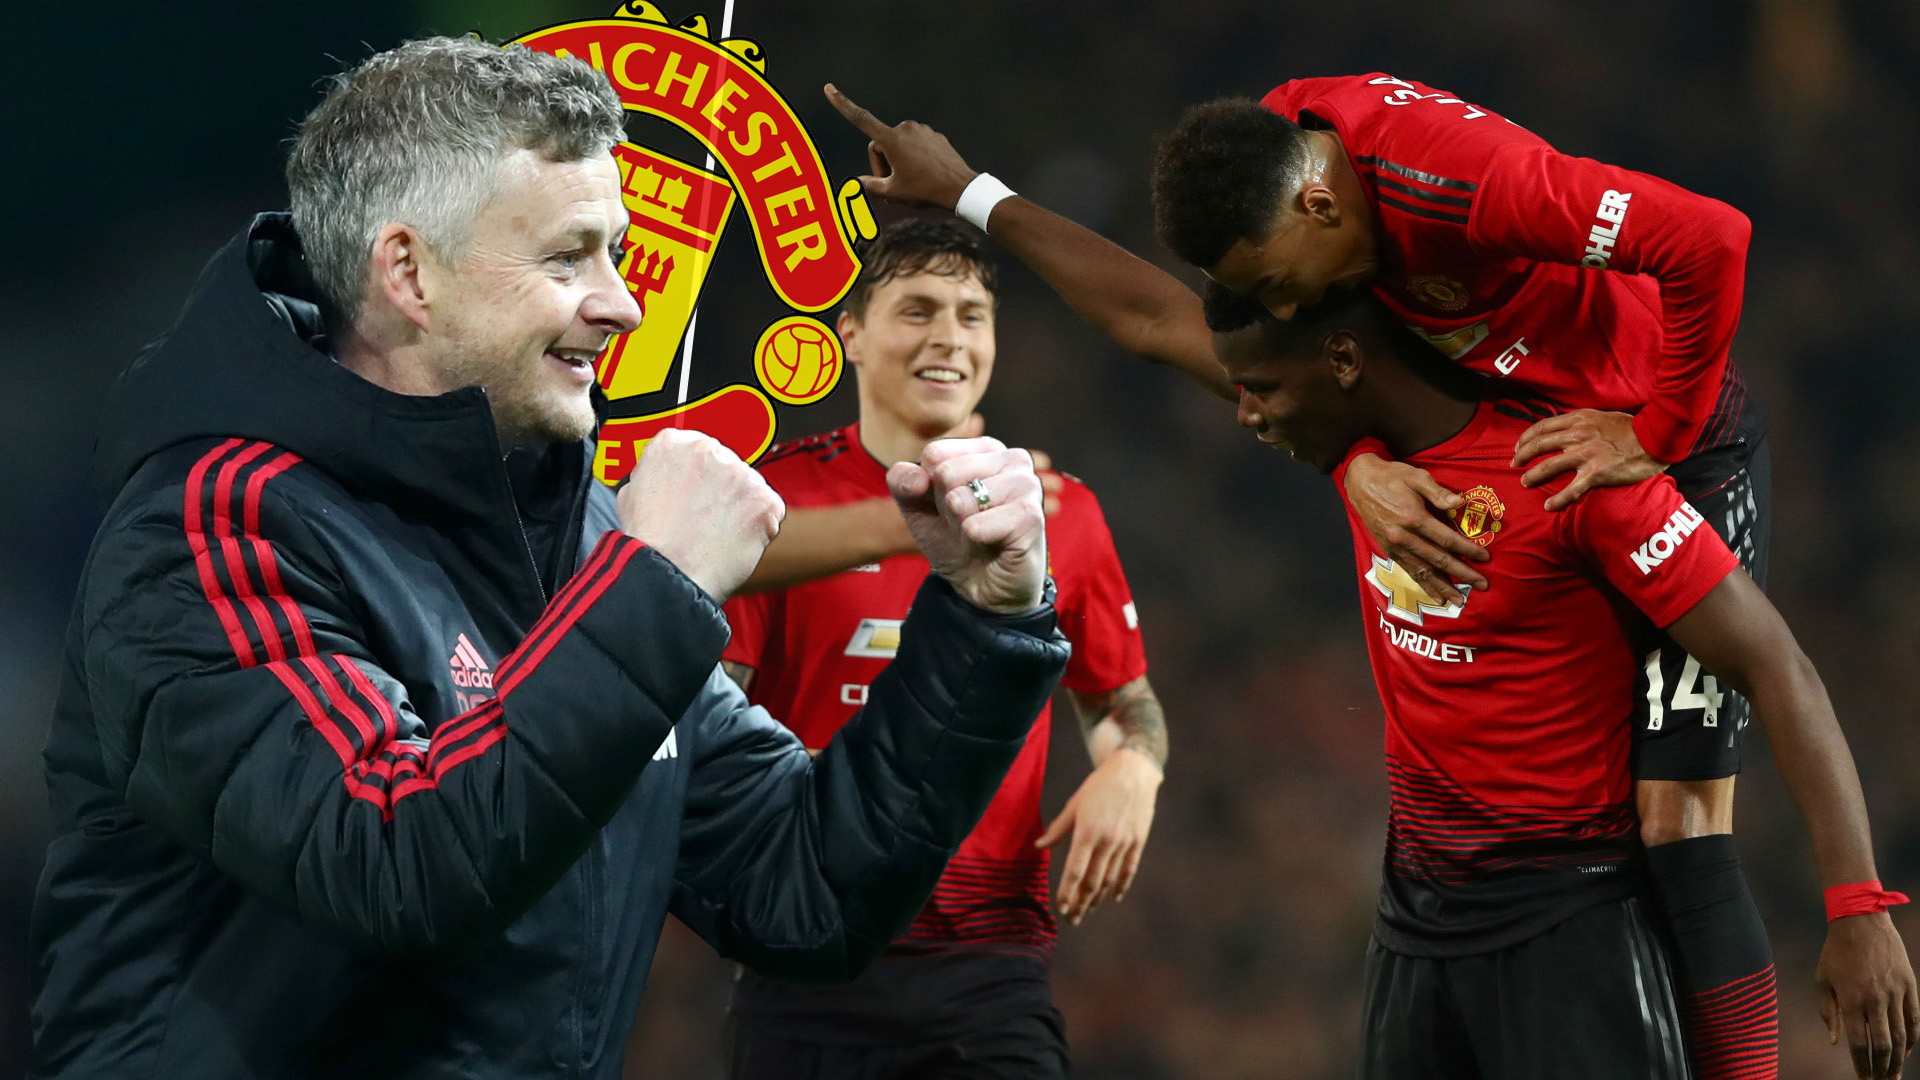 Ole Gunnar Solskjaer has restored Manchester United's fear factor and proven Gary Neville right - BÃ³ng ÄÃ¡